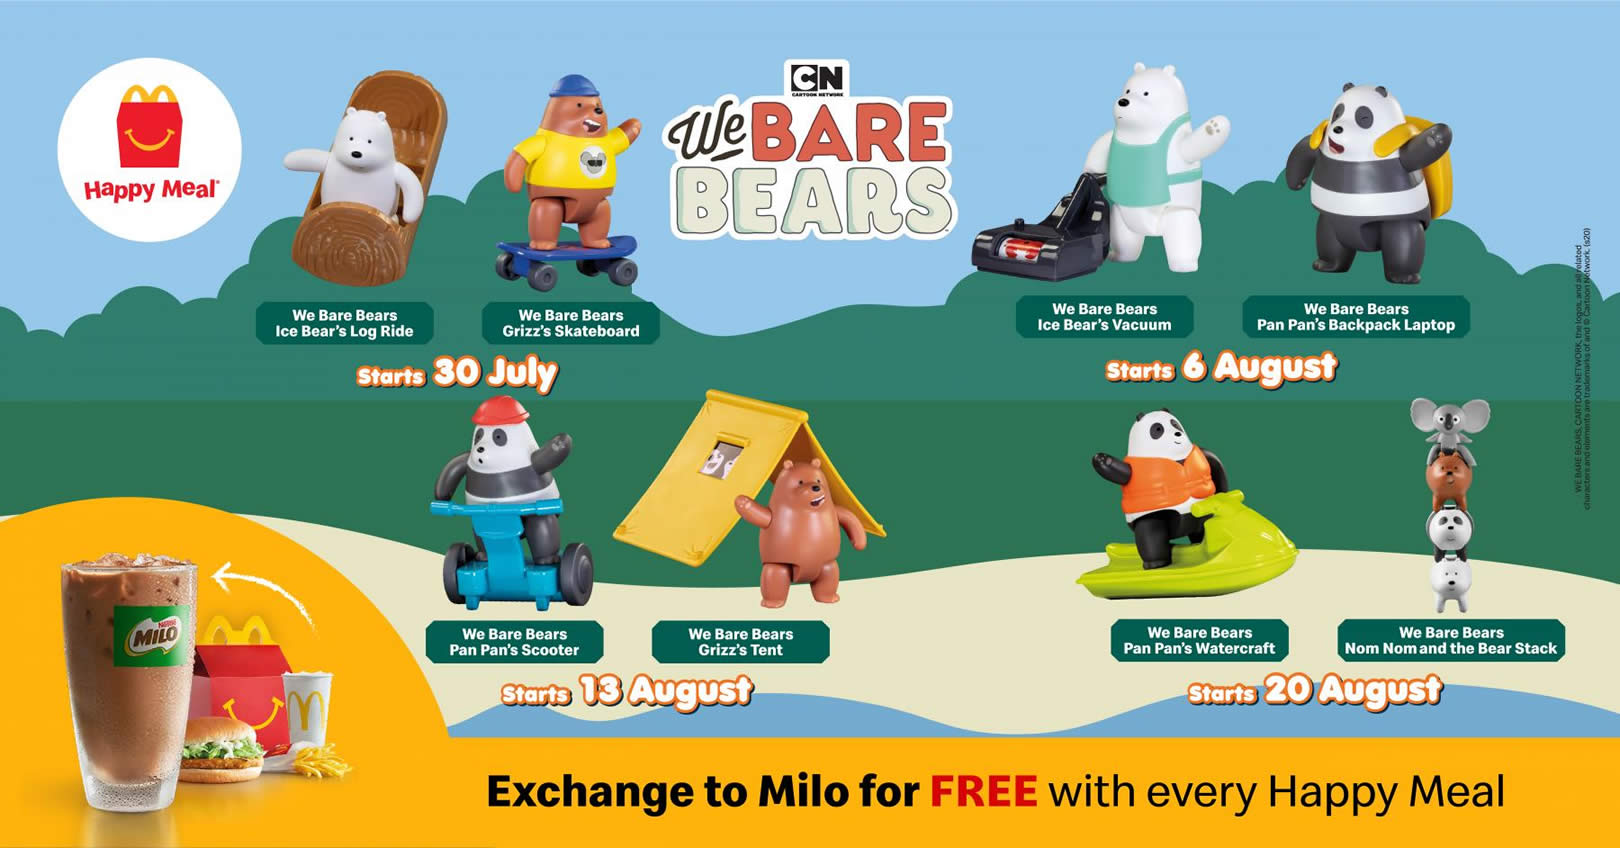 Featured image for McDonald's now offers We Bare Bears toys FREE with purchase of a Happy Meal till 26 August 2020